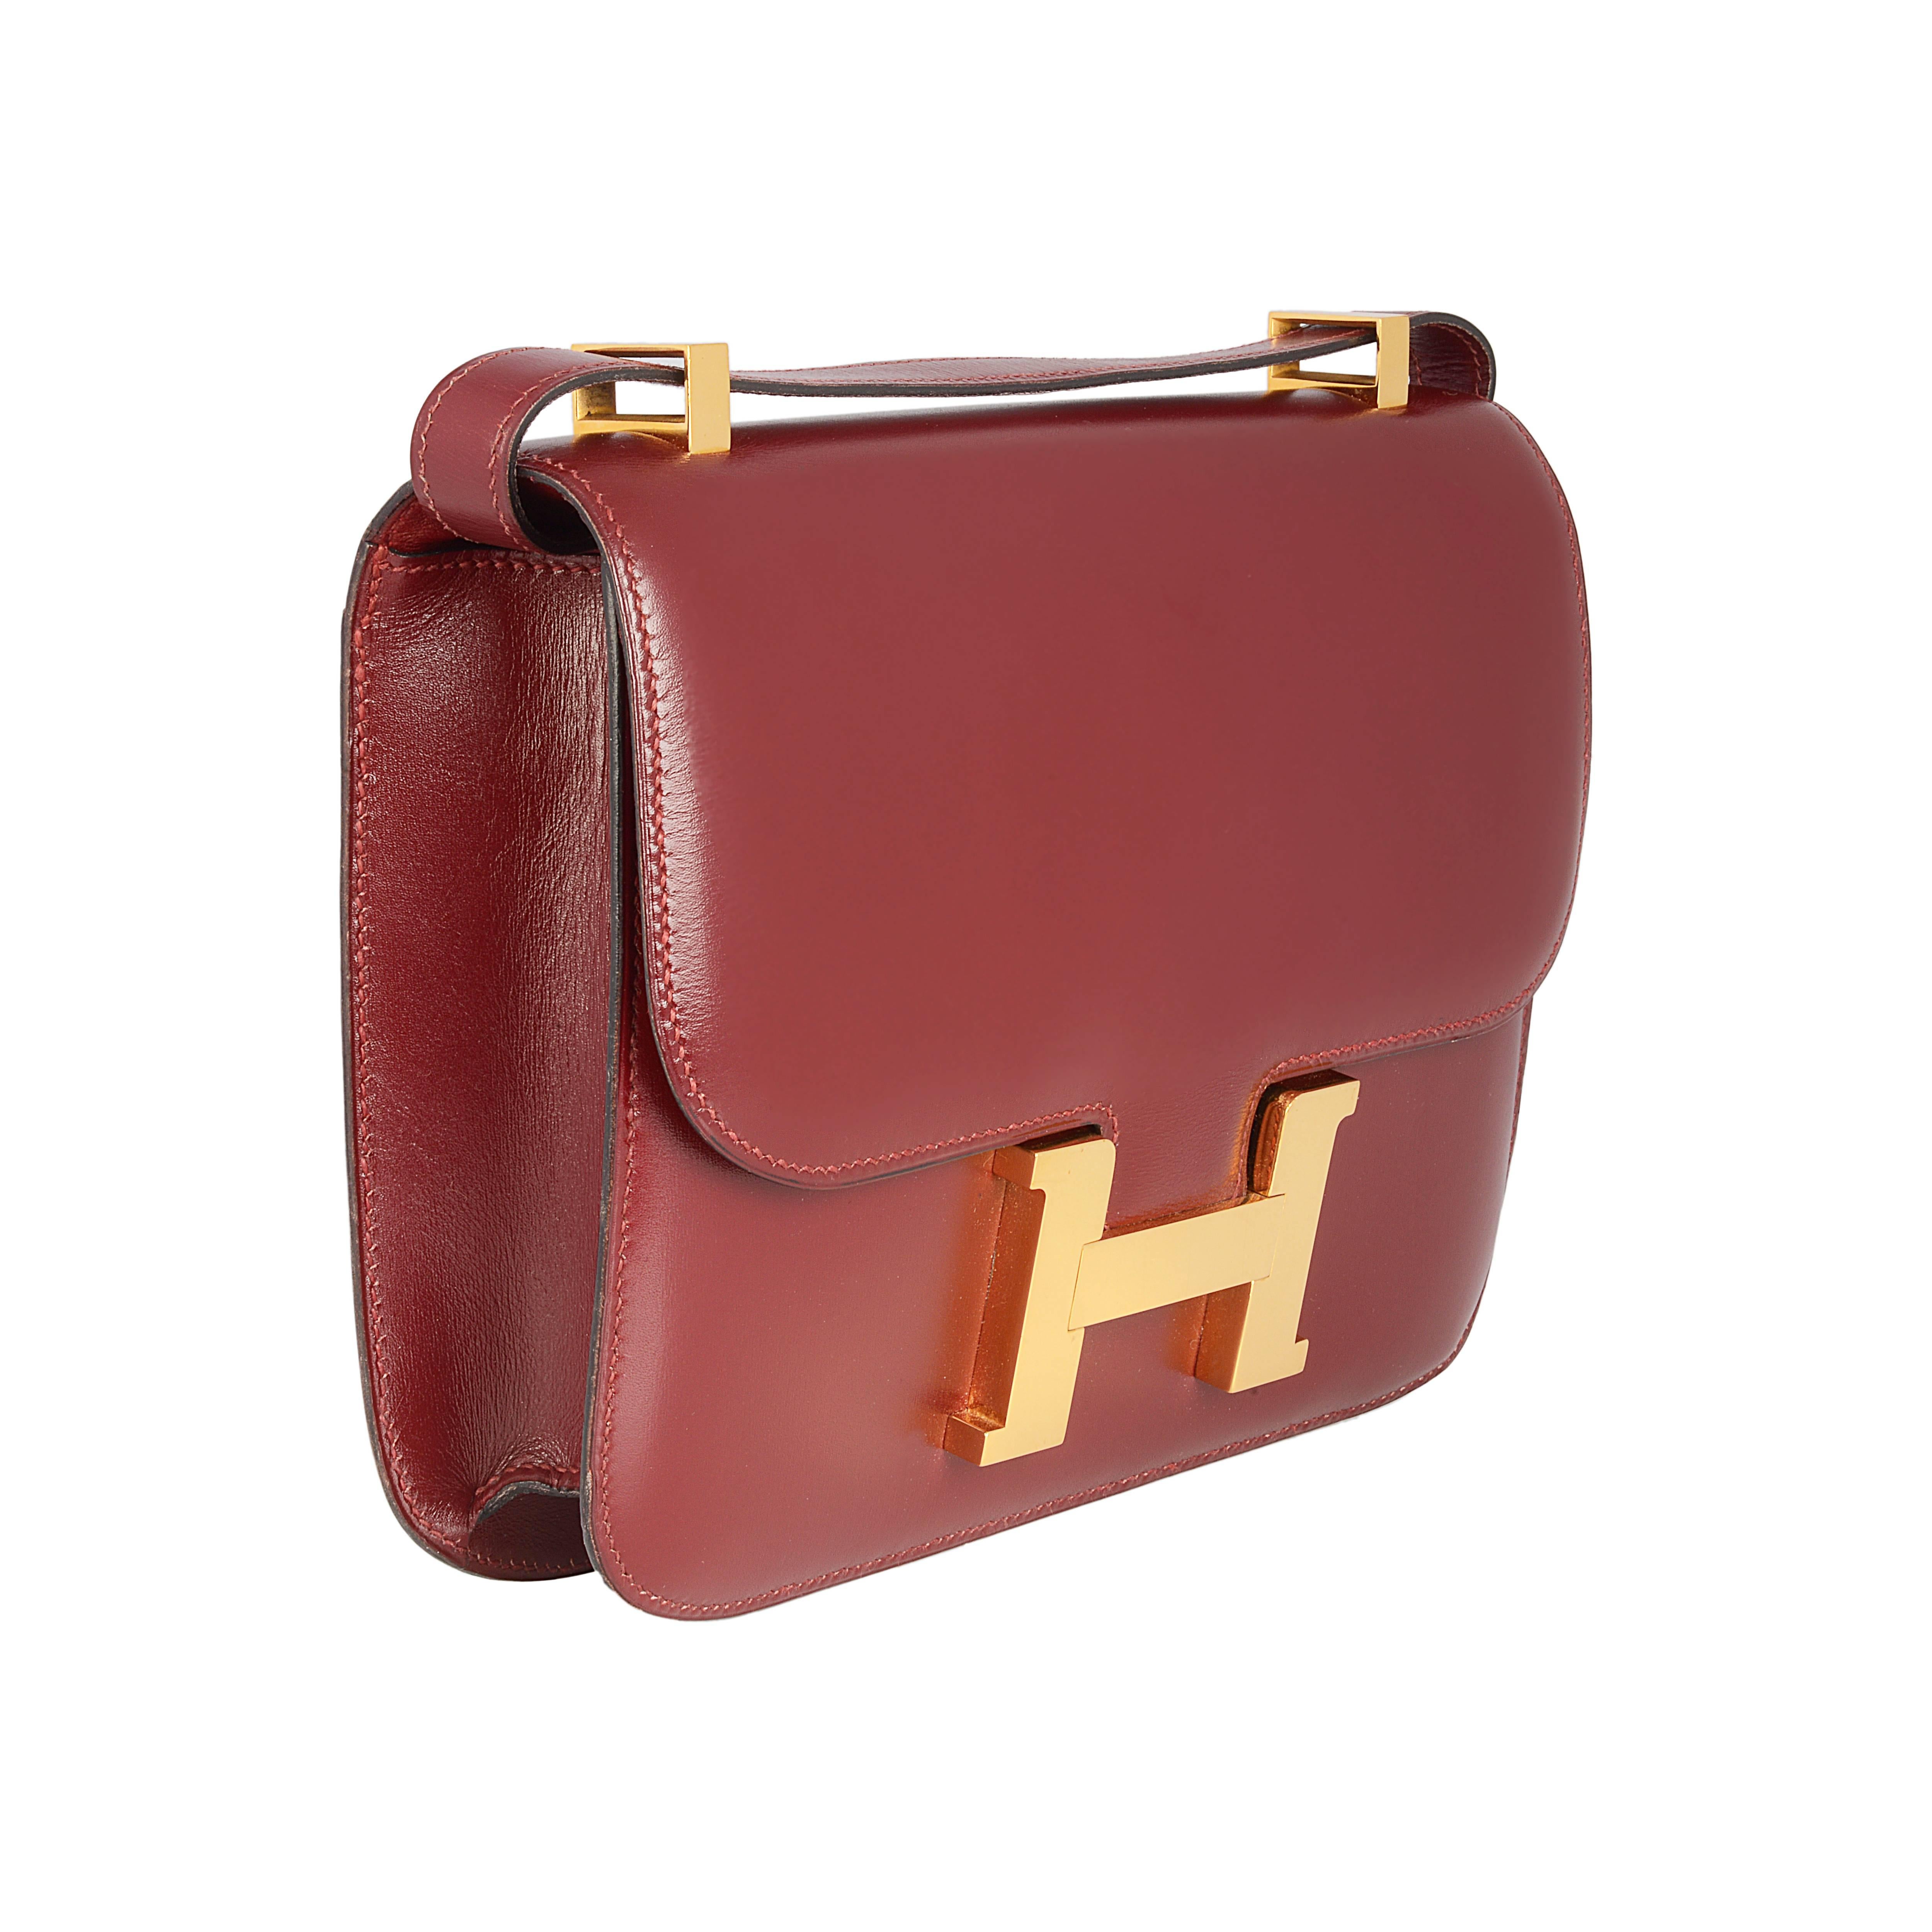 An Hermès Constance bag in a deep red box calf leather with gold-tone hardware. This is a very rare item in a sought-after colour. The bag is lined with soft red leather and has one internal zipped pocket. 

Colour: Rouge H

Material: Box calf